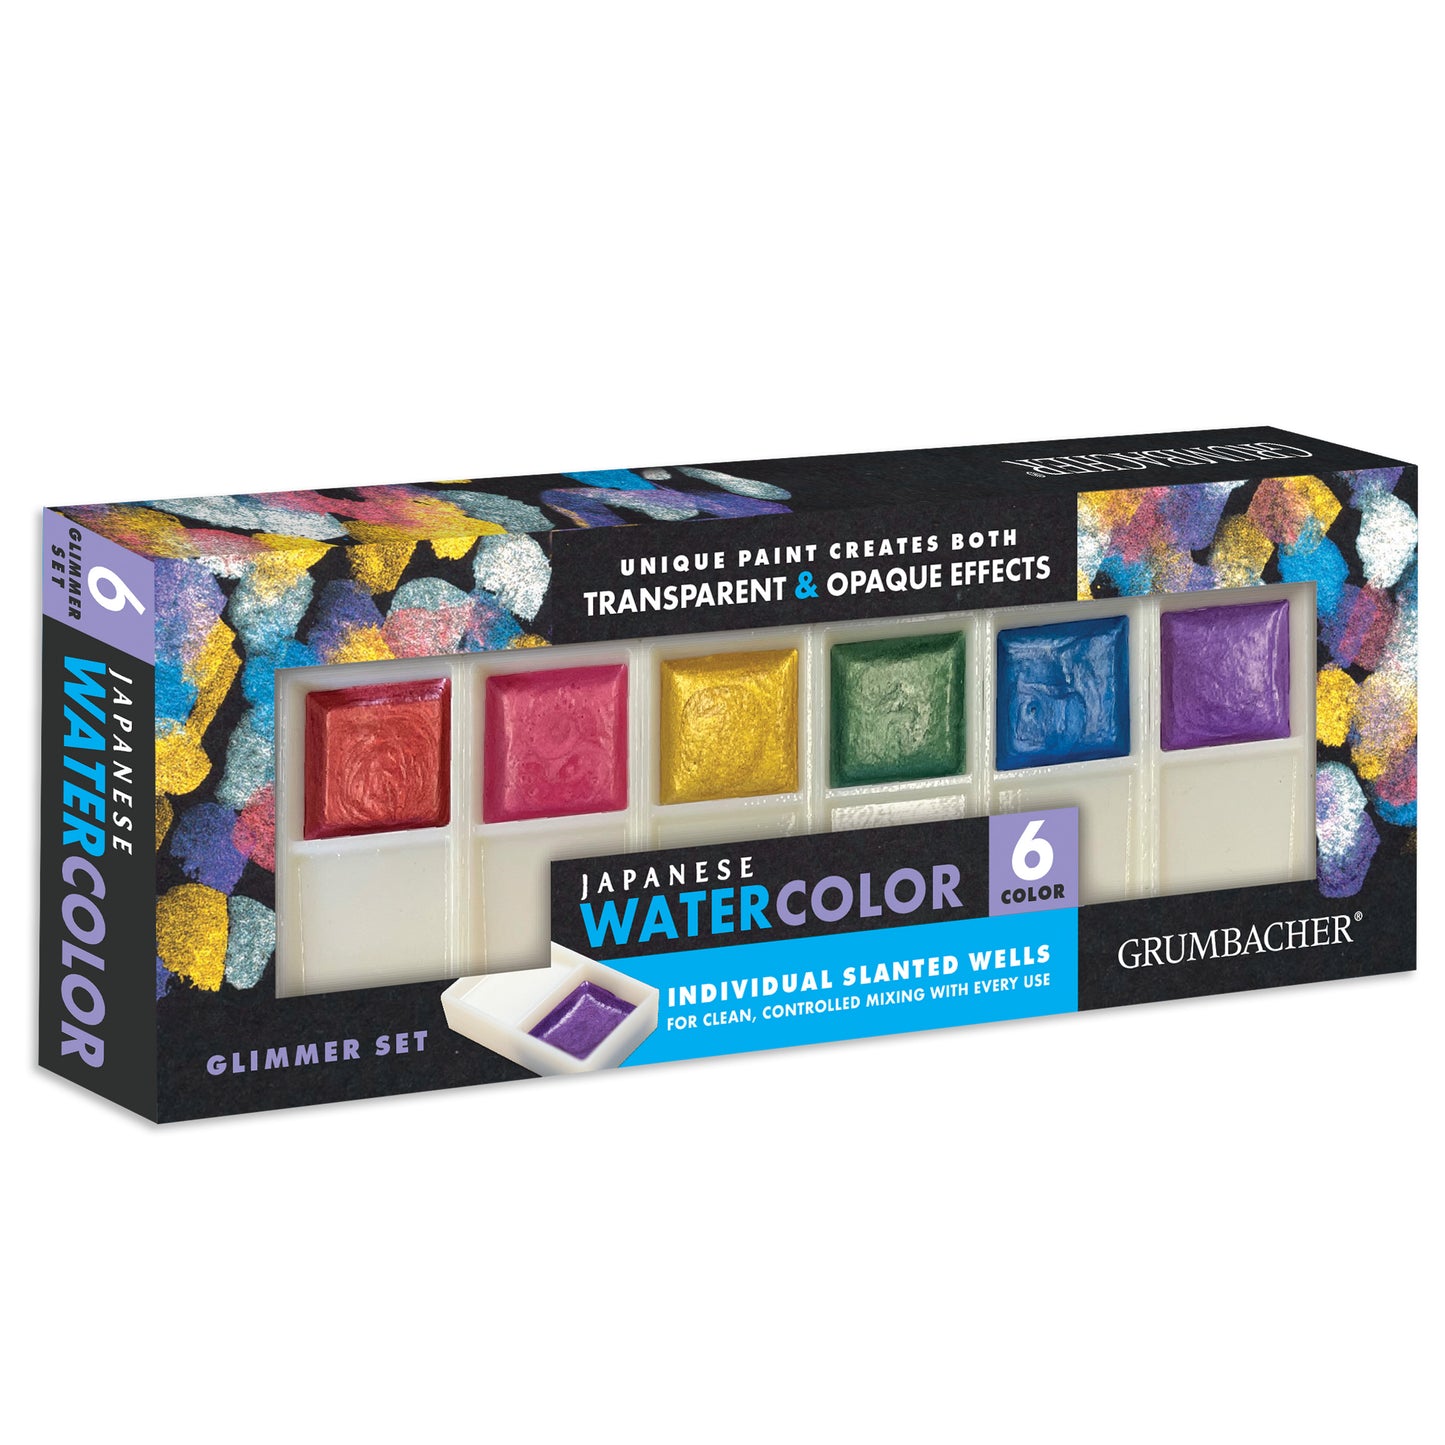 'Glimmer' Japanese Watercolor Paint by Grumbacher: 6 colors